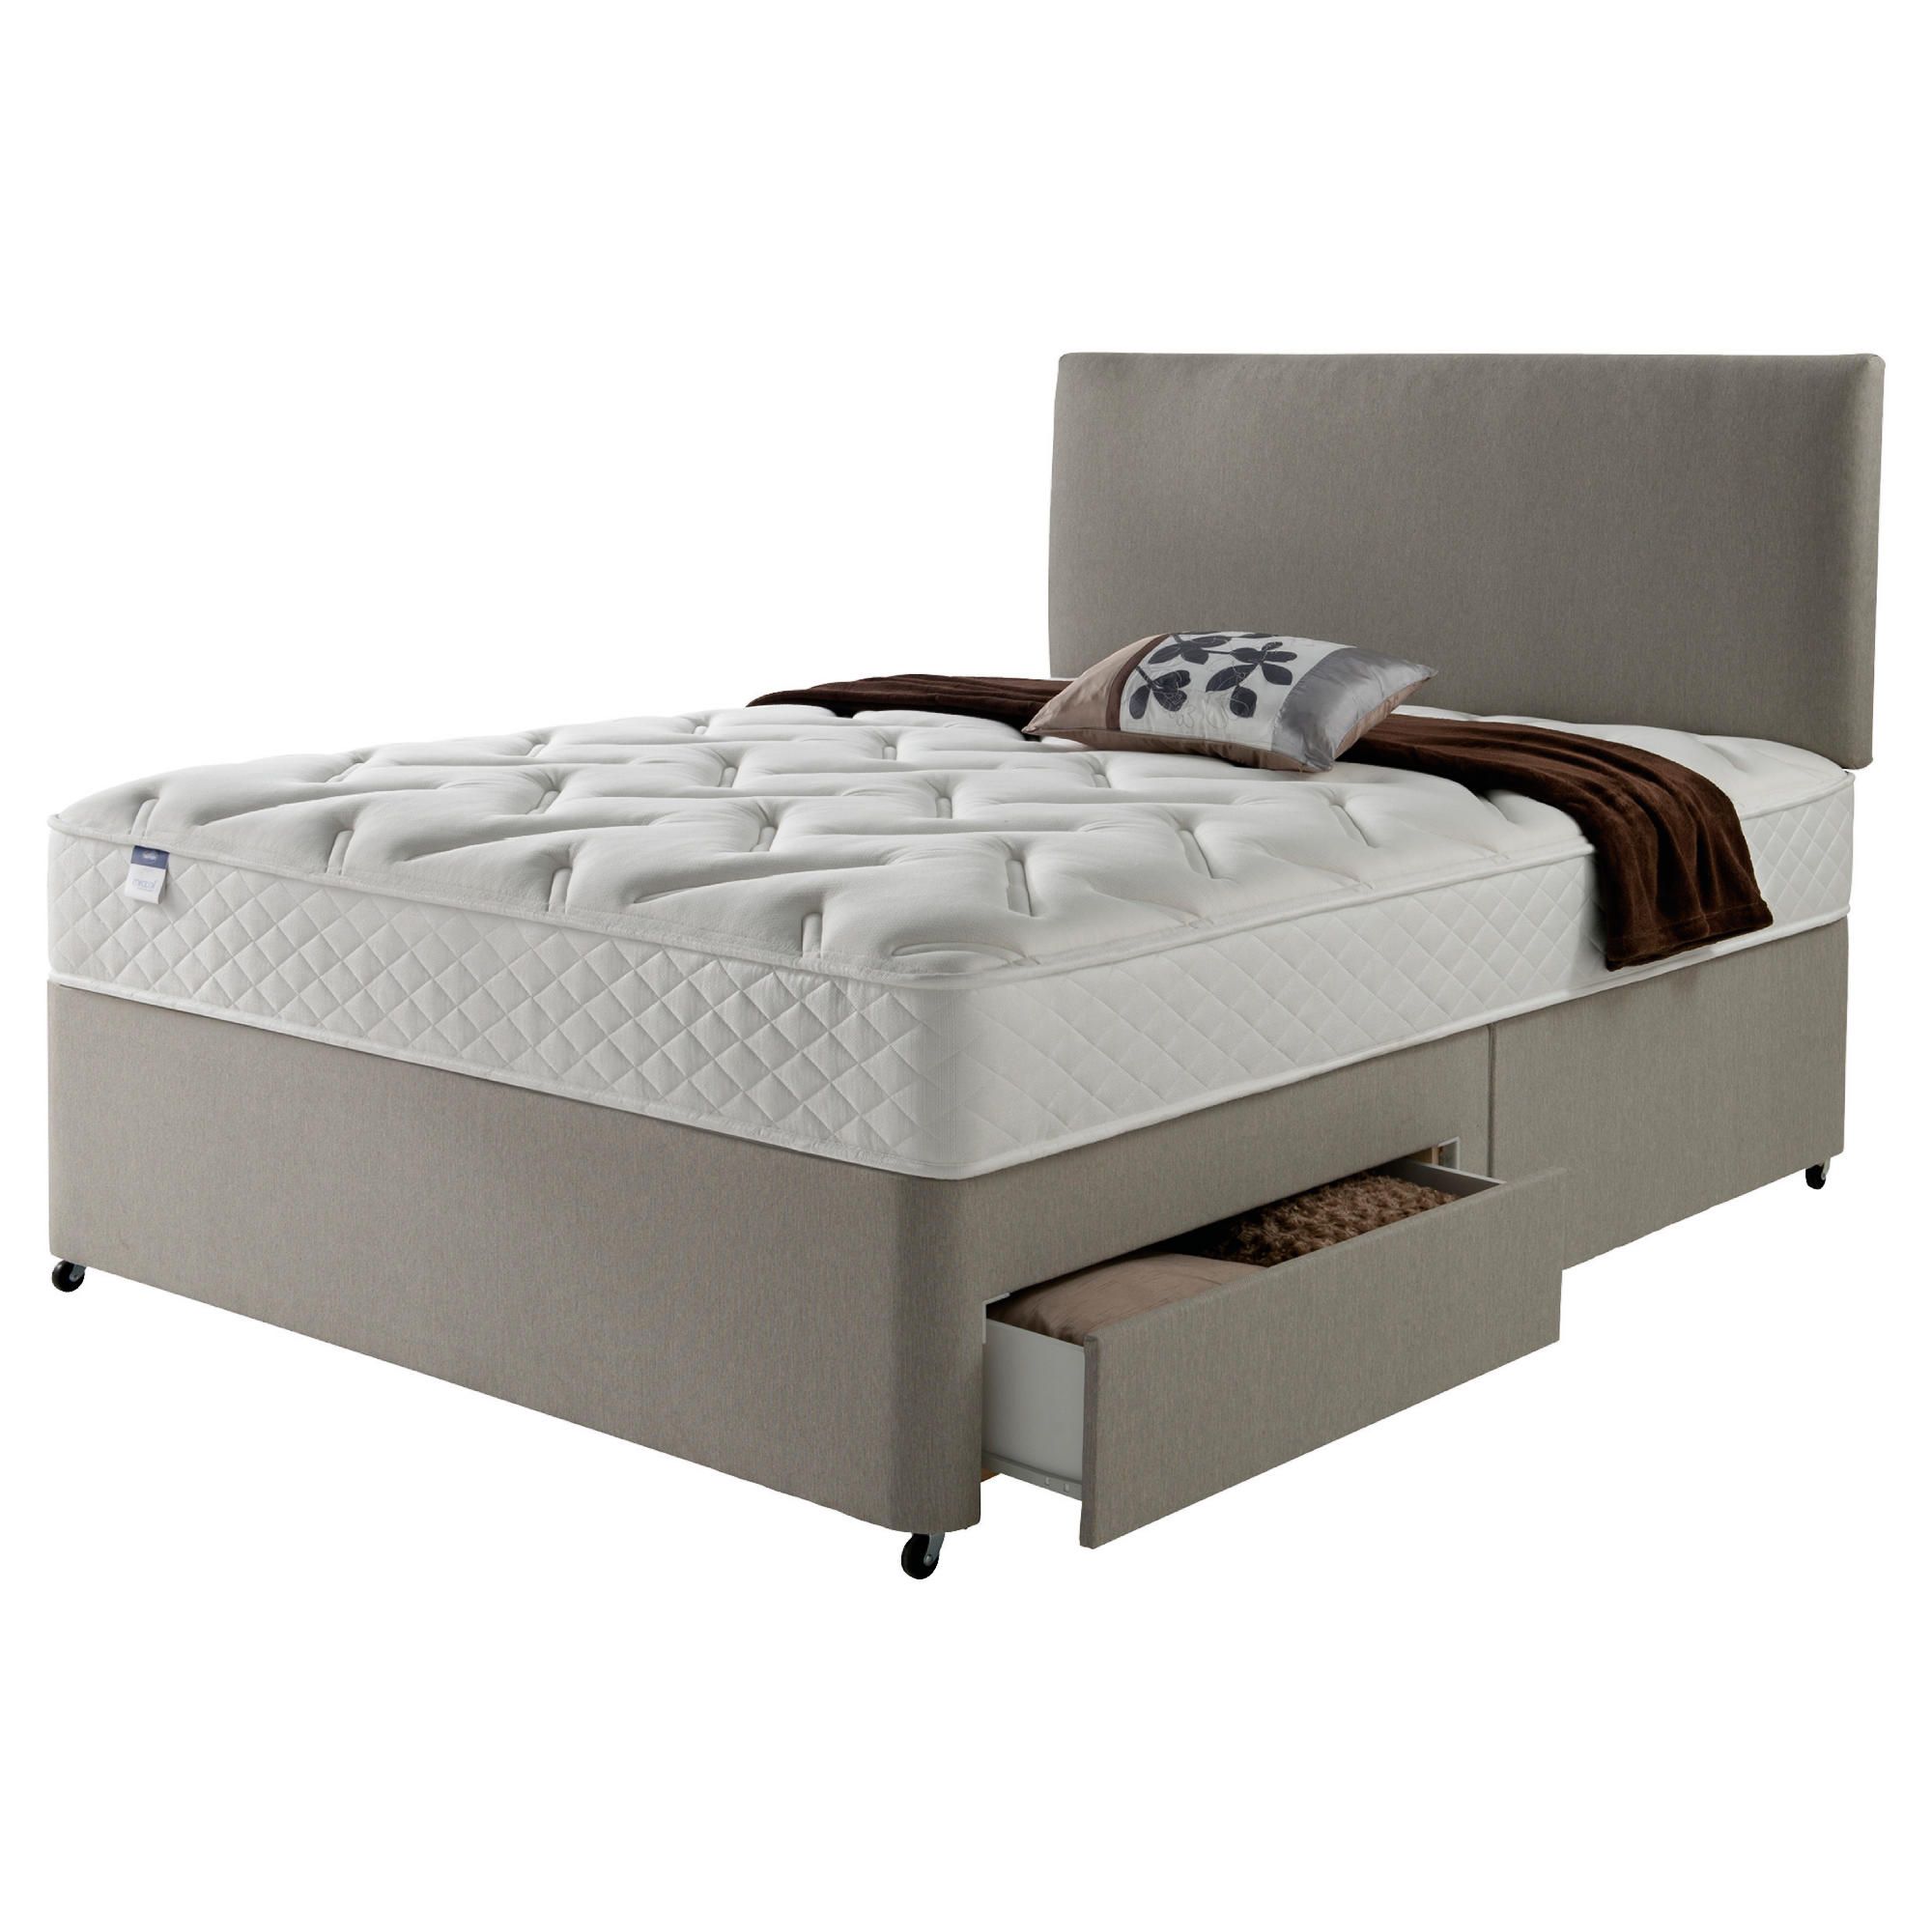 Silentnight Miracoil Luxury Memory 4 Drawer King Size Divan Mink with Headboard at Tescos Direct